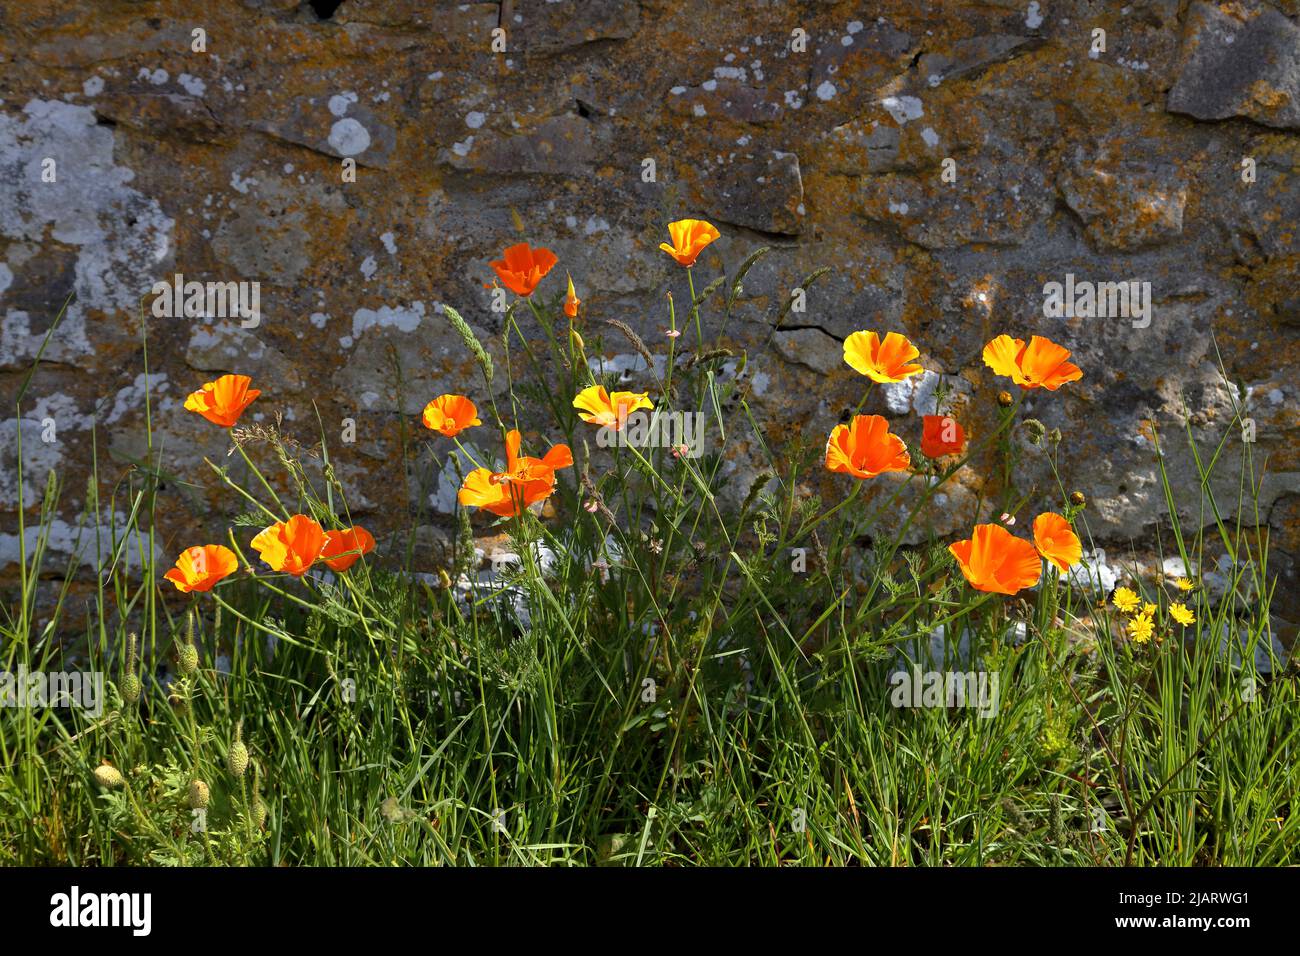 Just growing as mother nature intended these wild roadside flowers brighten up and roadside. Stock Photo